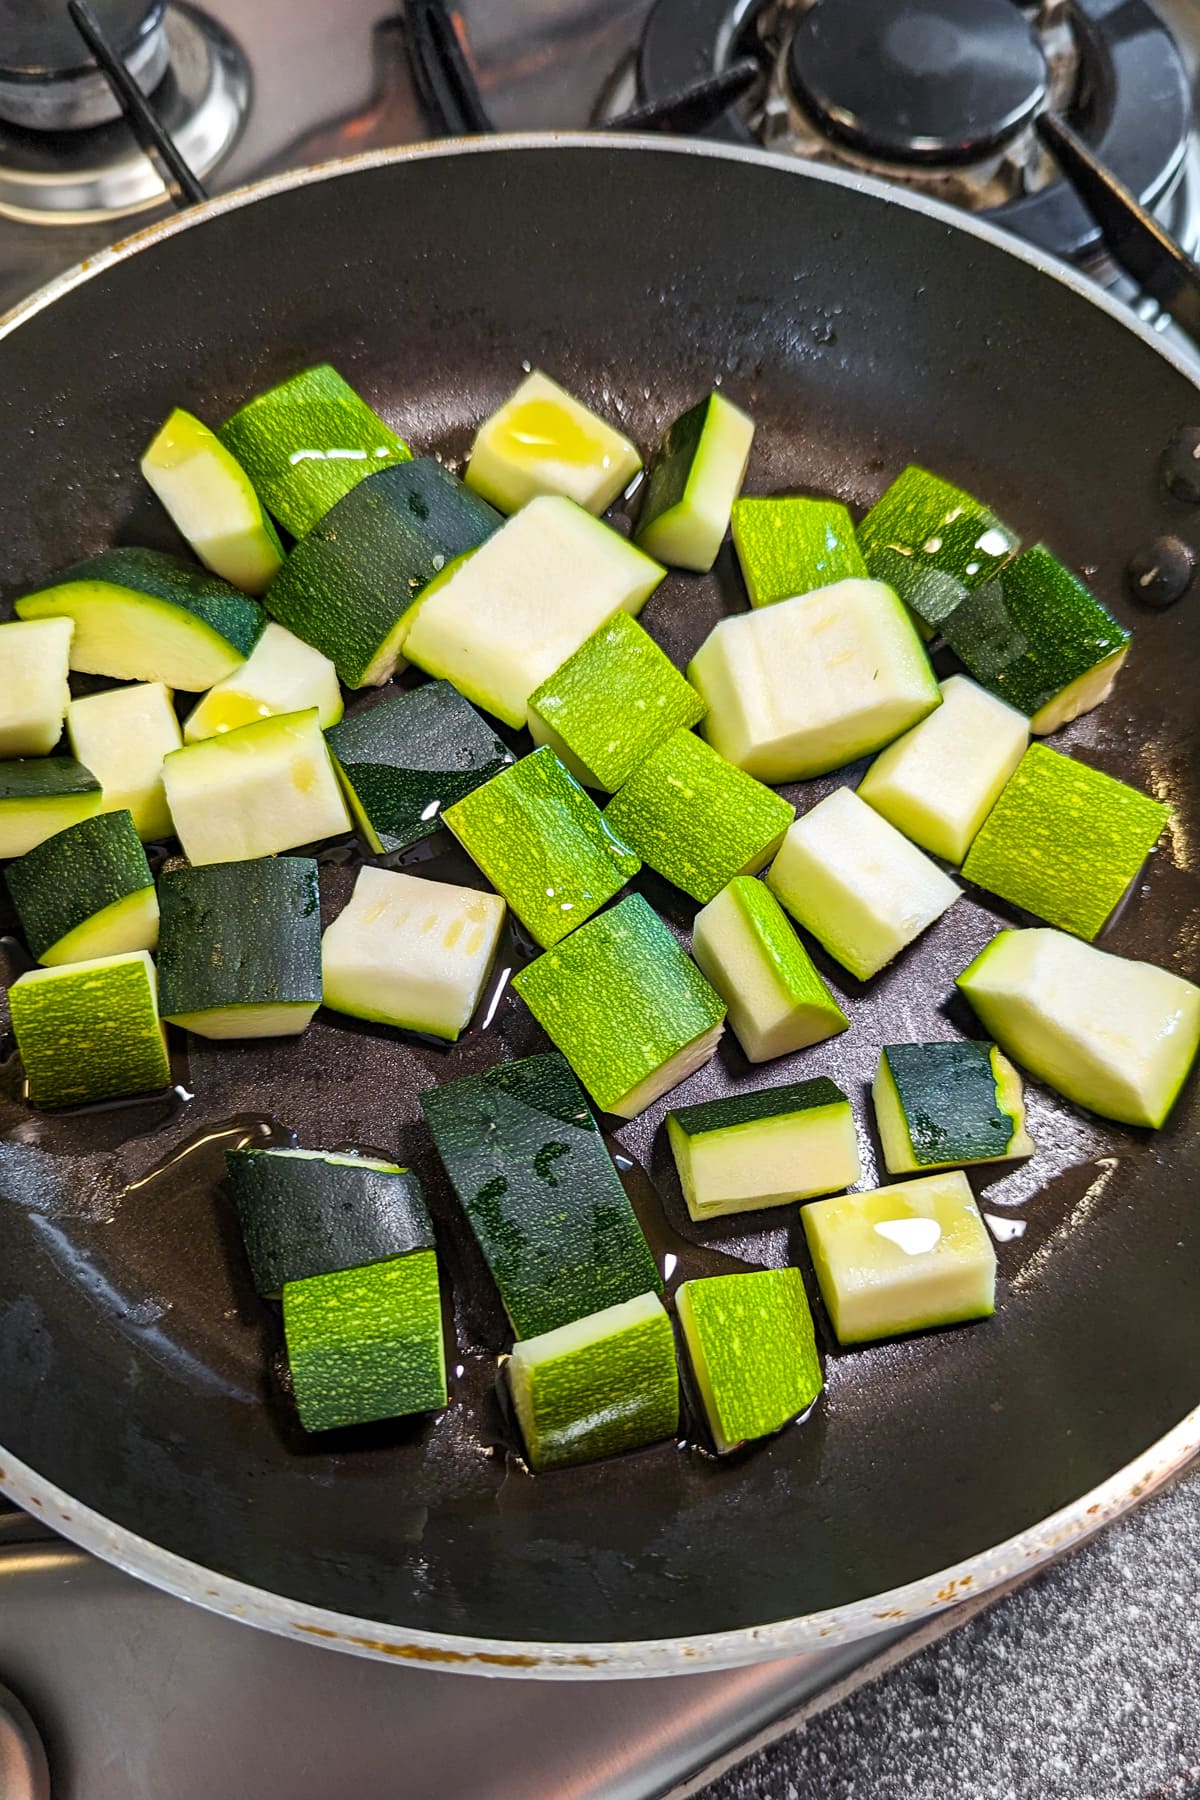 Frying zucchini pieces in a frying pan on the stove.